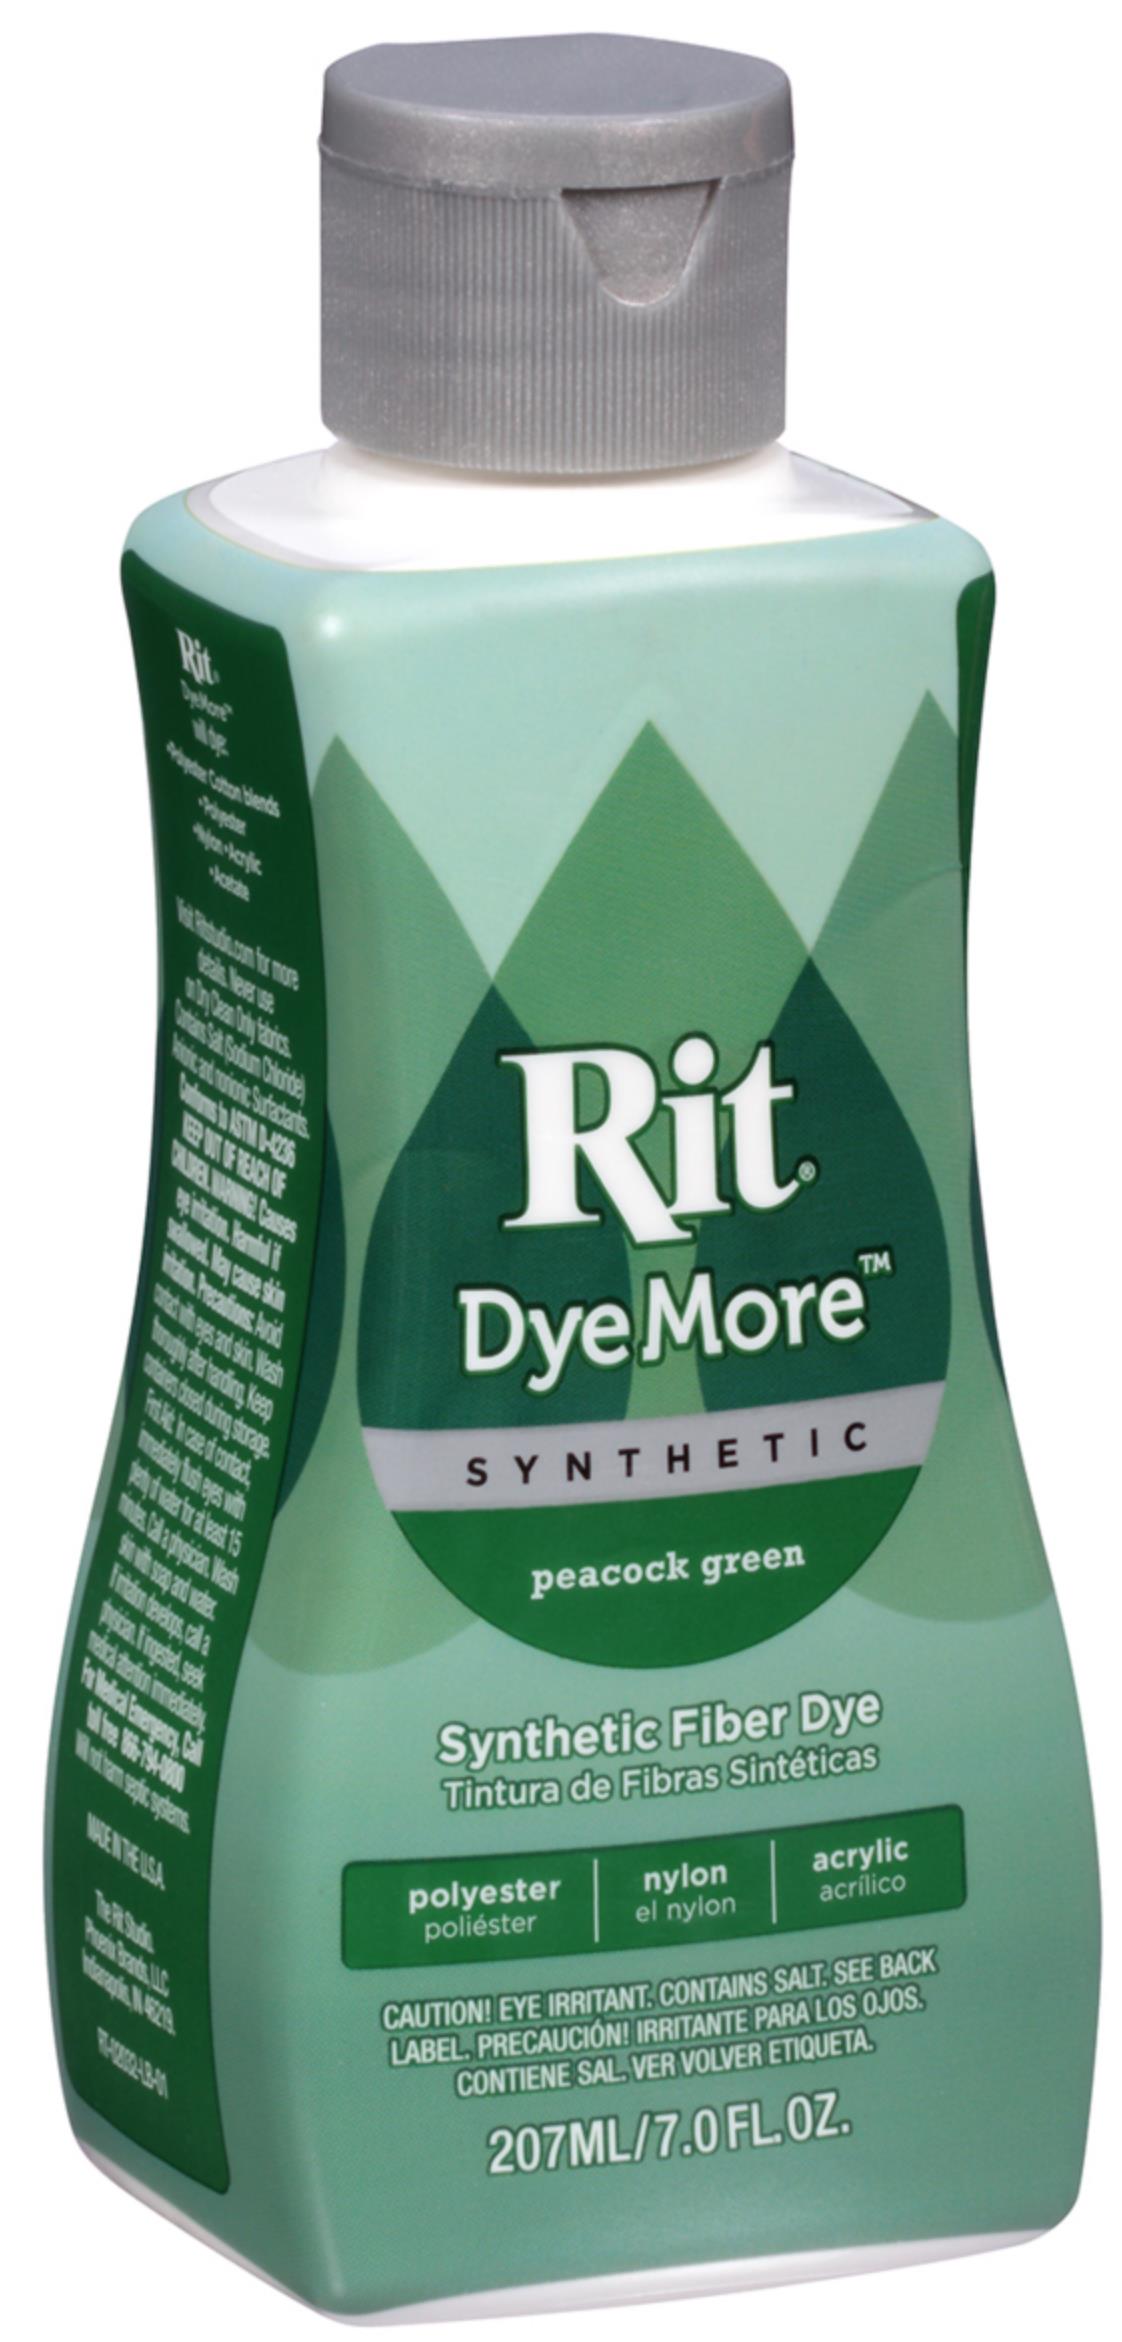 Rit DyeMore Advanced Liquid Dye for Polyester, Acrylic, Acetate, Nylon and  More, Sand Stone